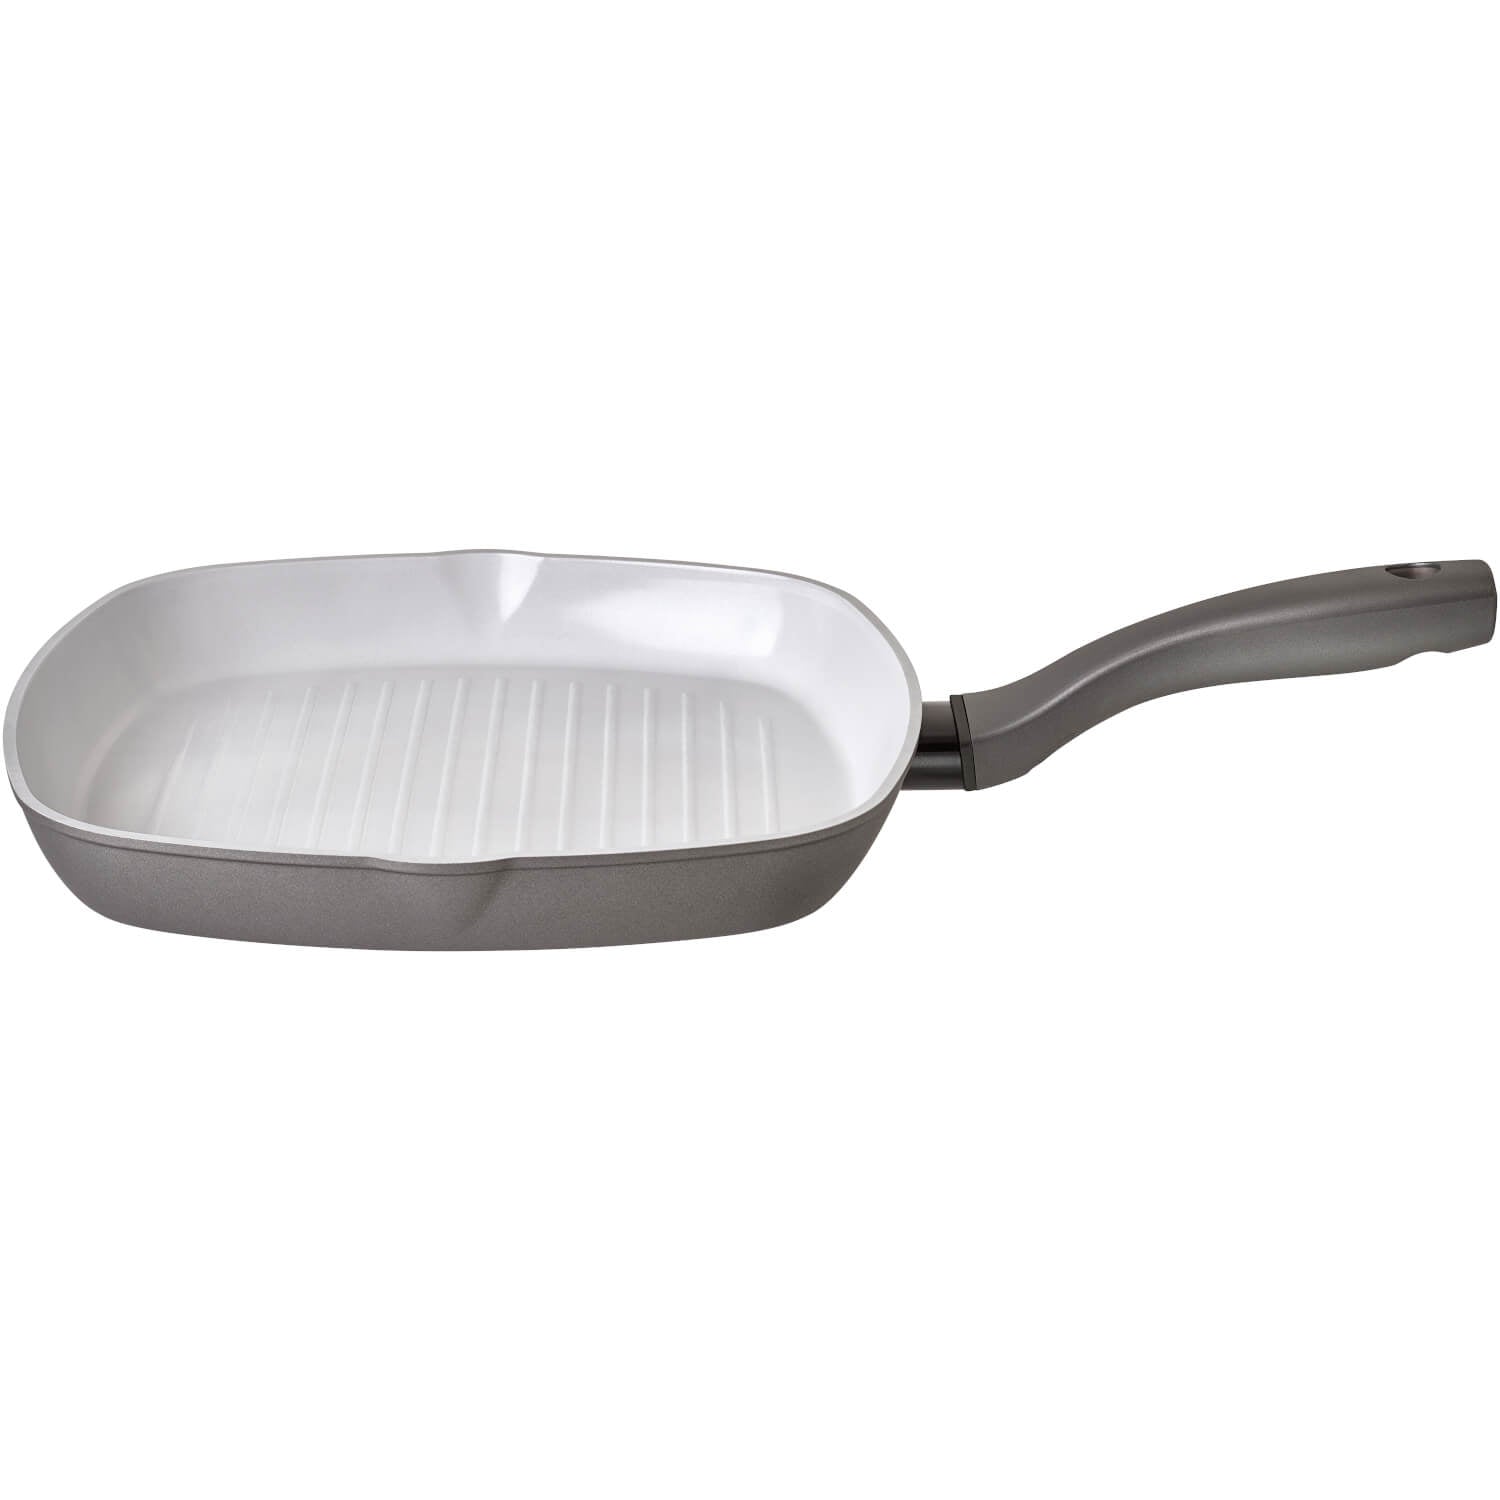 Meyers Earth Pan Square Grill Pan - 28cm 1 Shaws Department Stores